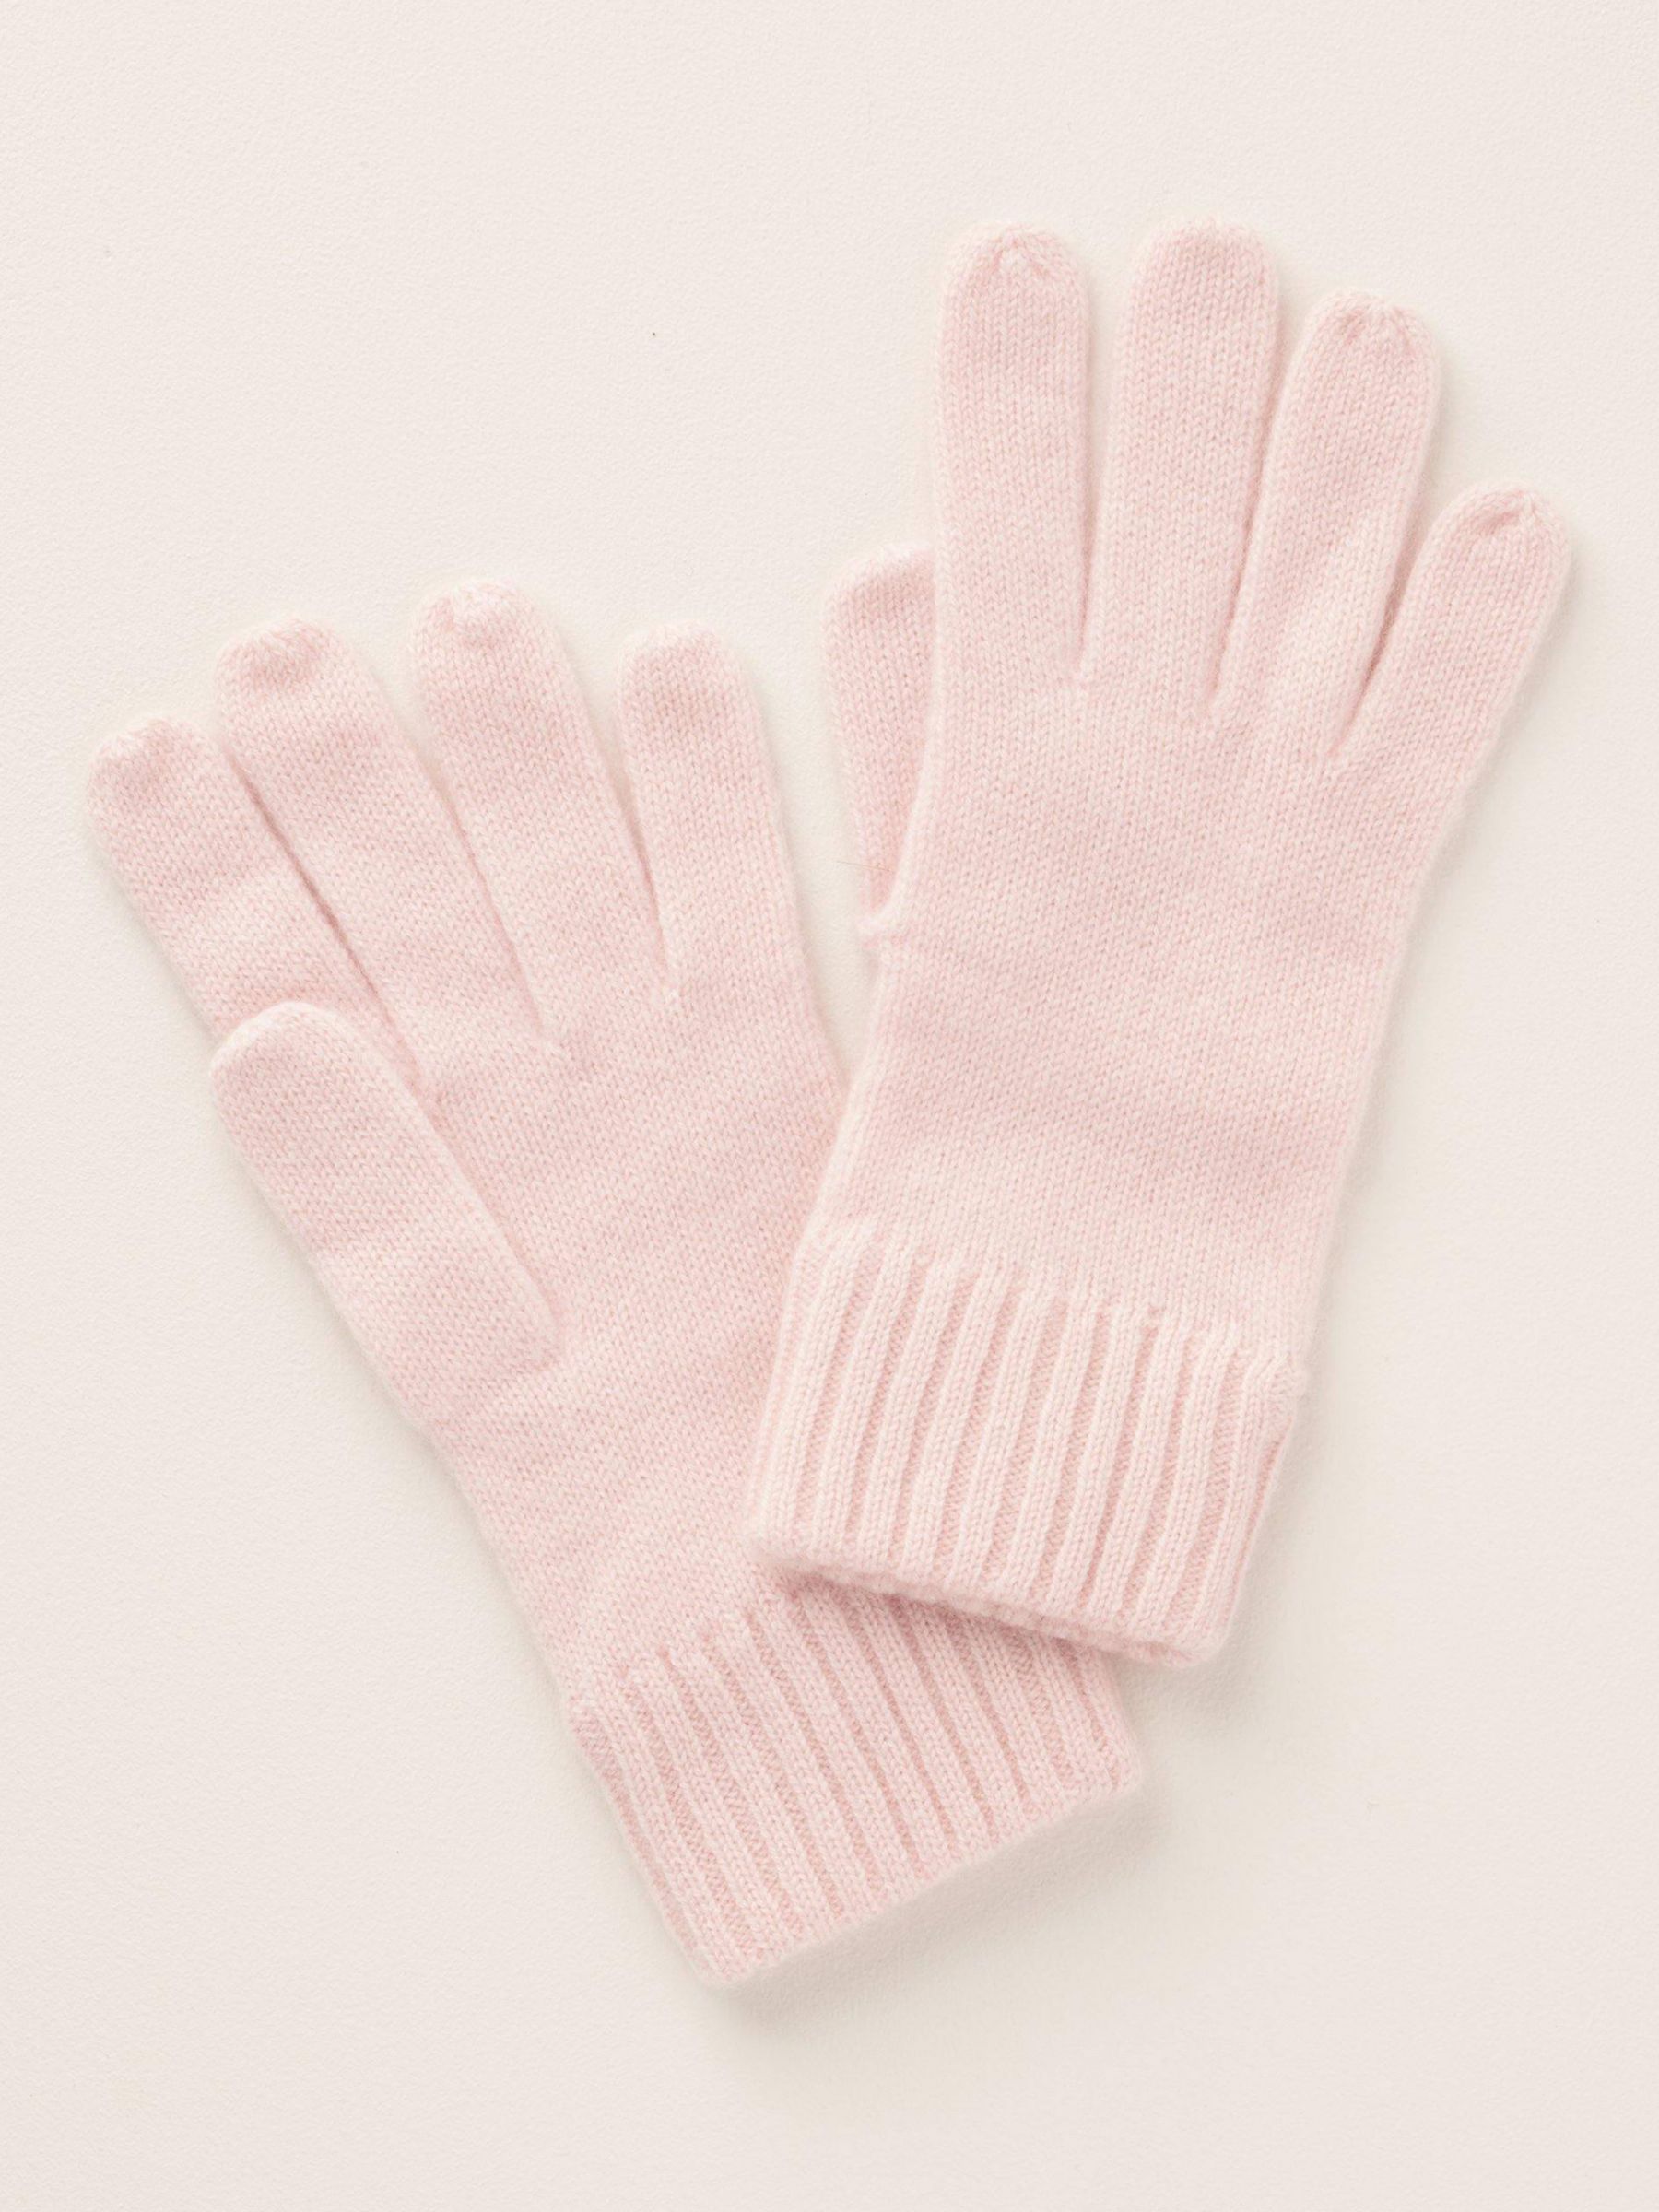 Truly Cashmere Gloves, Blush at John Lewis & Partners